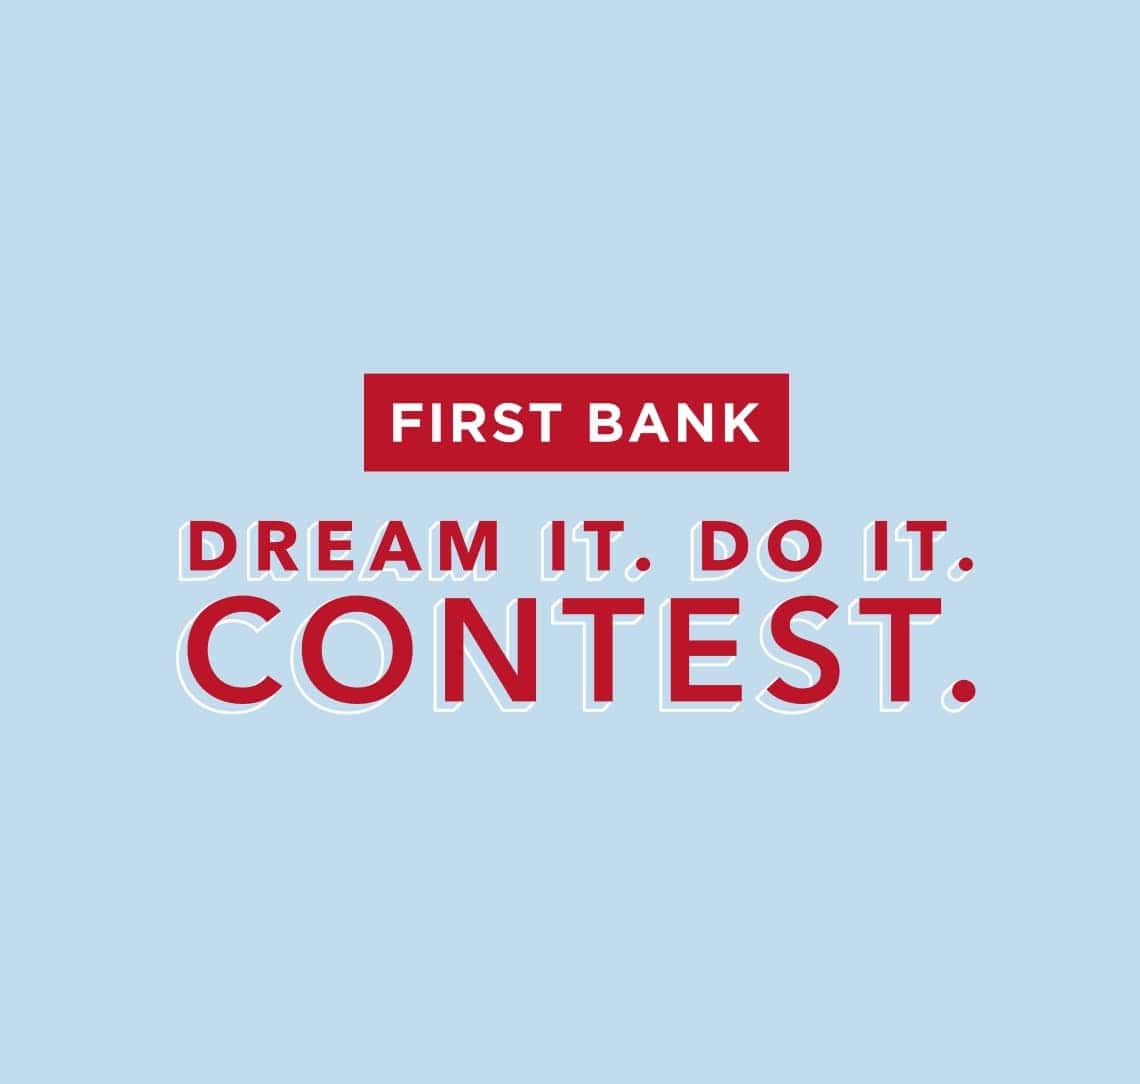 First Bank. Dream It. Do It. Contest It.